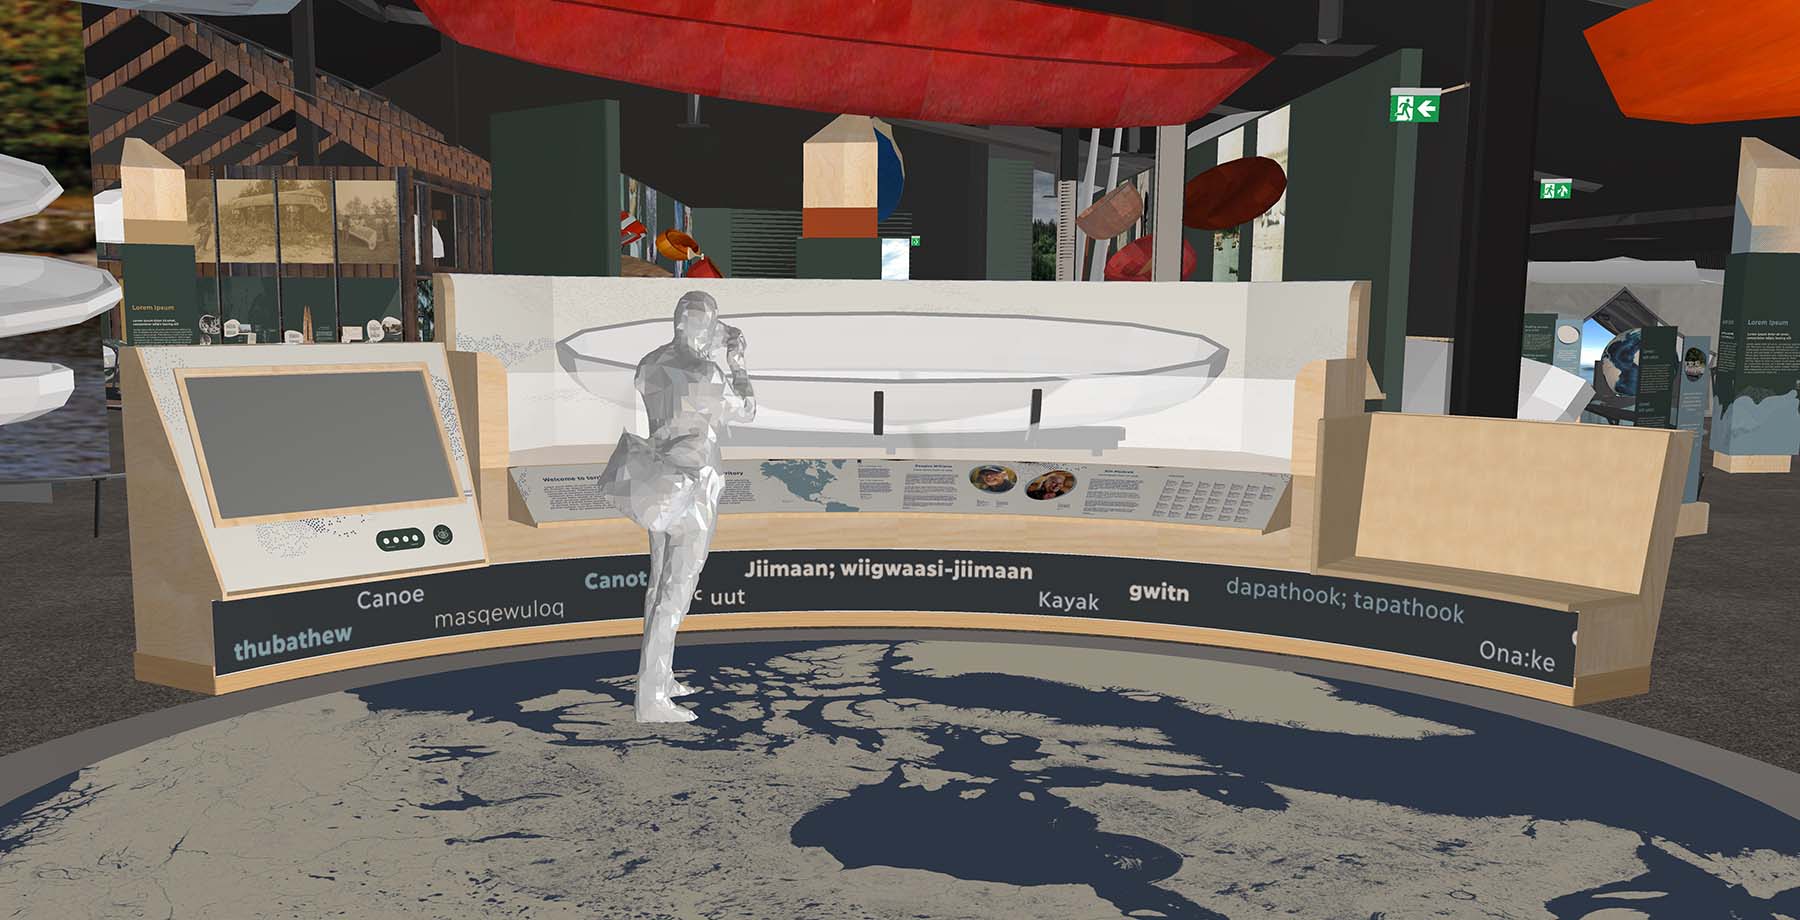 A conceptual rendering of exhibits in the Headwaters exhibit with multiple languages featured.